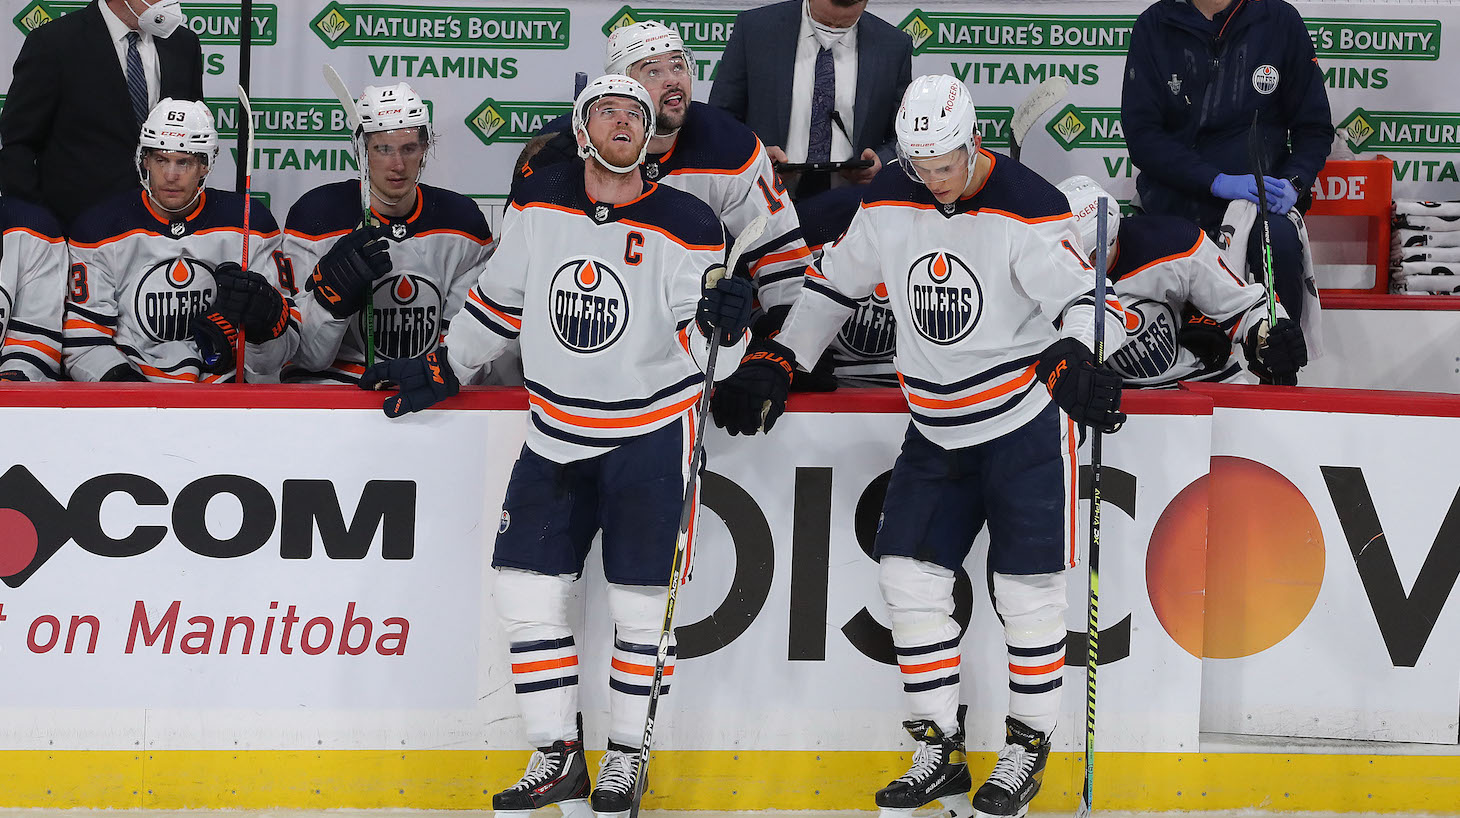 WINNIPEG, MANITOBA - MAY 23: Connor McDavid #97 and Jesse Puljujarvi #13 of the Edmonton Oilers react after the Jets tied up Game Three of the First Round of the 2021 Stanley Cup Playoffs against the Winnipeg Jets on May 23, 2021 at Bell MTS Place in Winnipeg, Manitoba, Canada. (Photo by Jason Halstead/Getty Images)